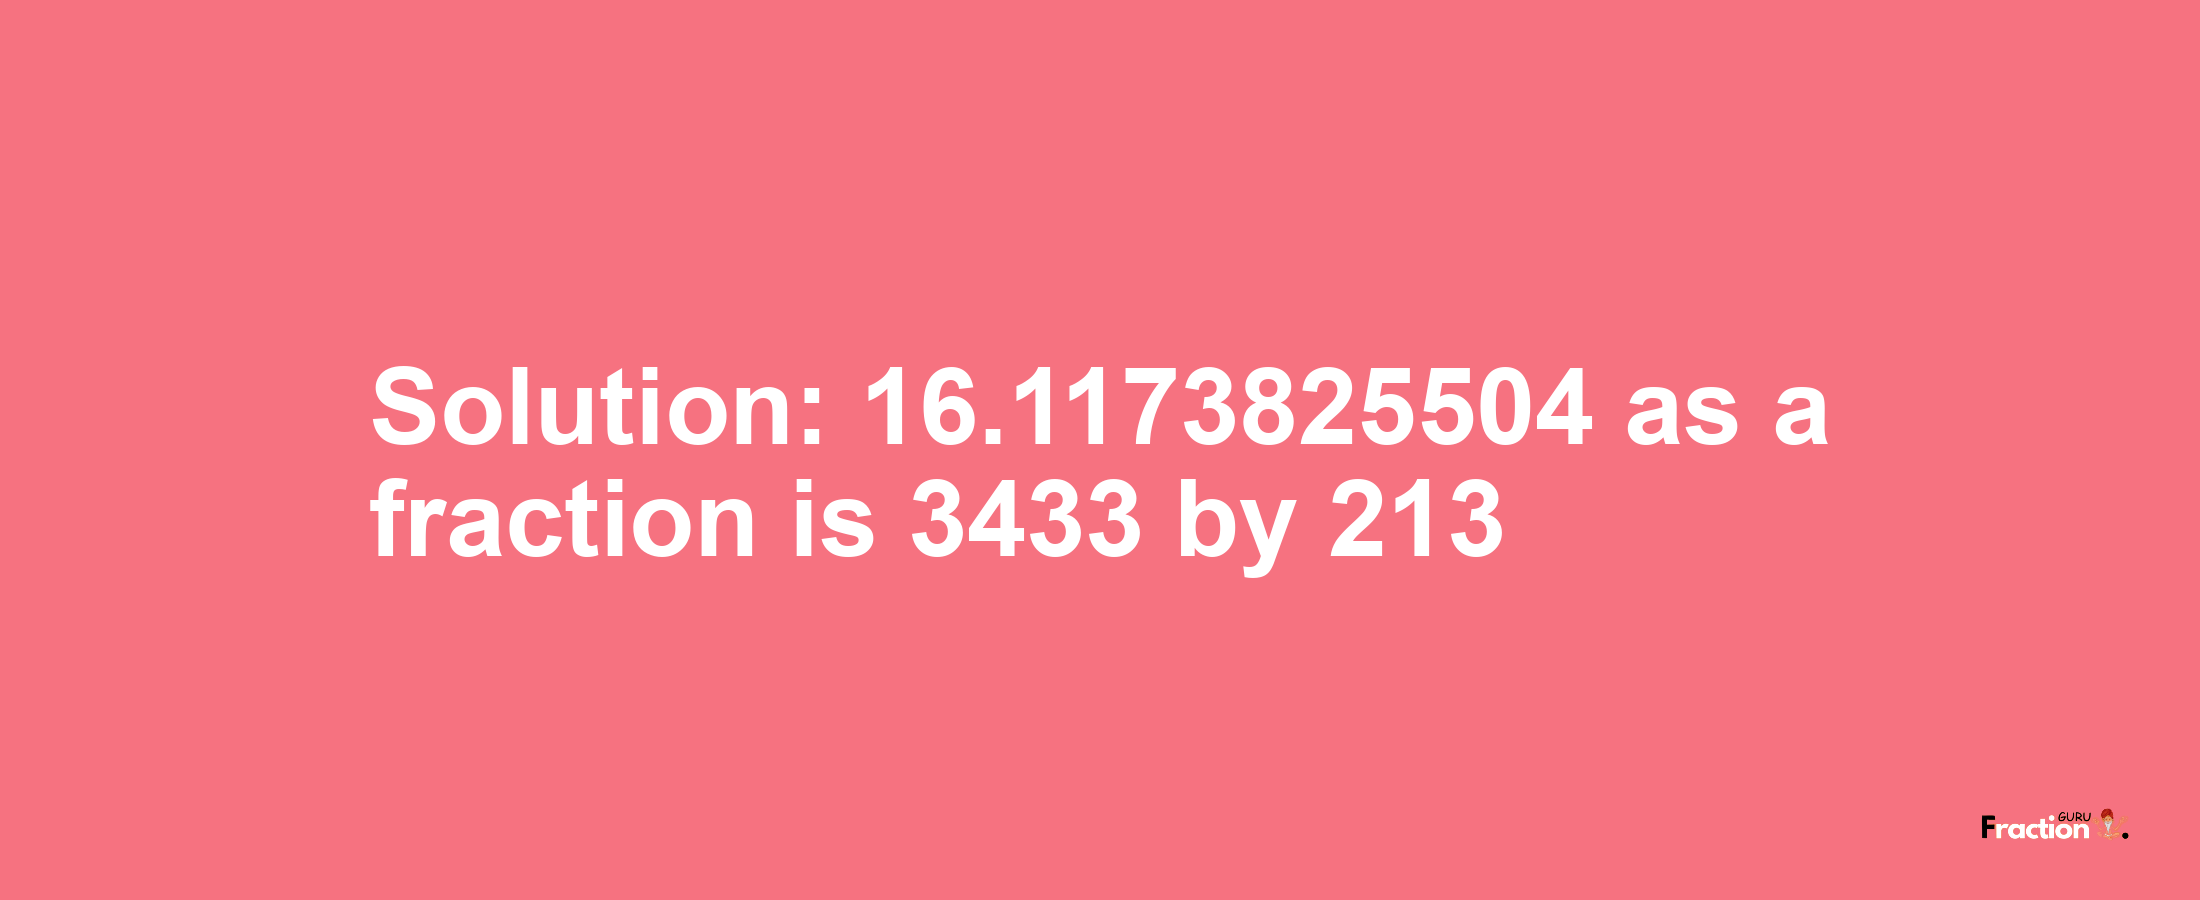 Solution:16.1173825504 as a fraction is 3433/213